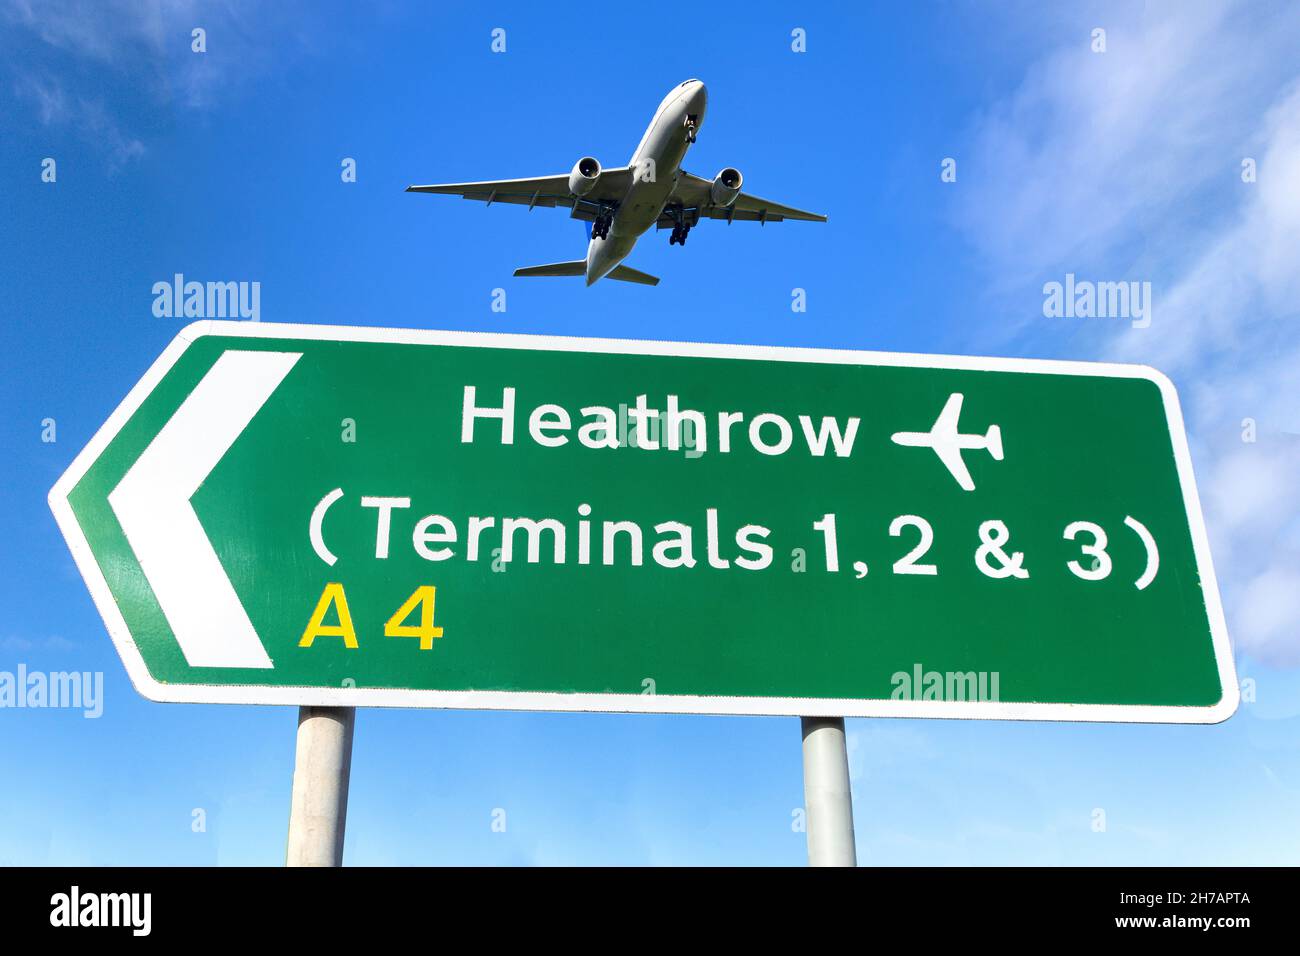 Aircraft flying over Heathrow Airport Terminals road sign, Cranford, London Borough of Hounslow, Greater London, England, United Kingdom Stock Photo